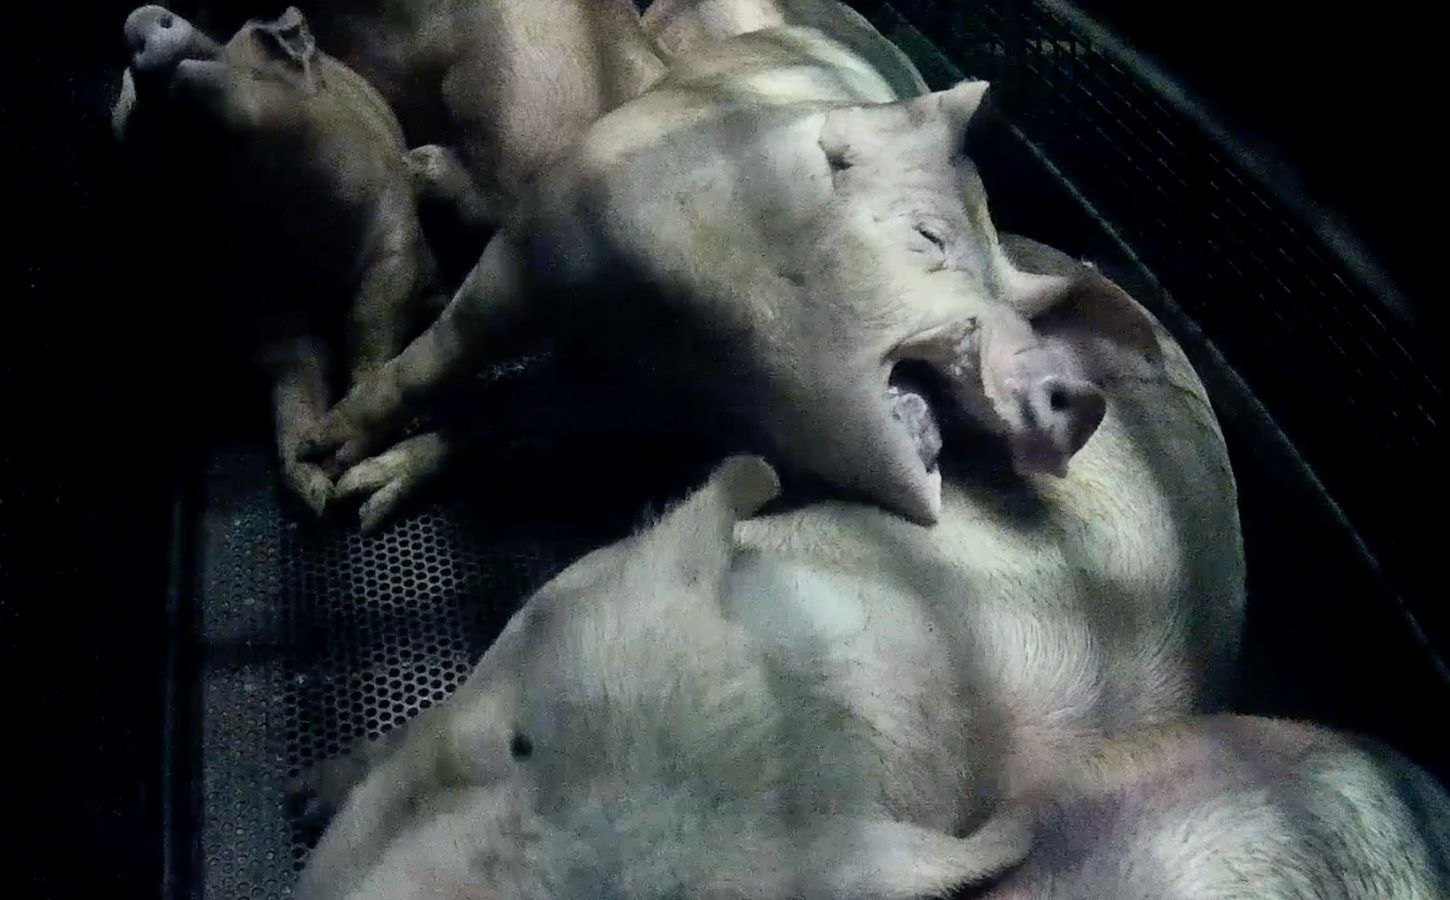 Pigs being gassed with CO2 in a metal gondola in a UK slaughterhouse